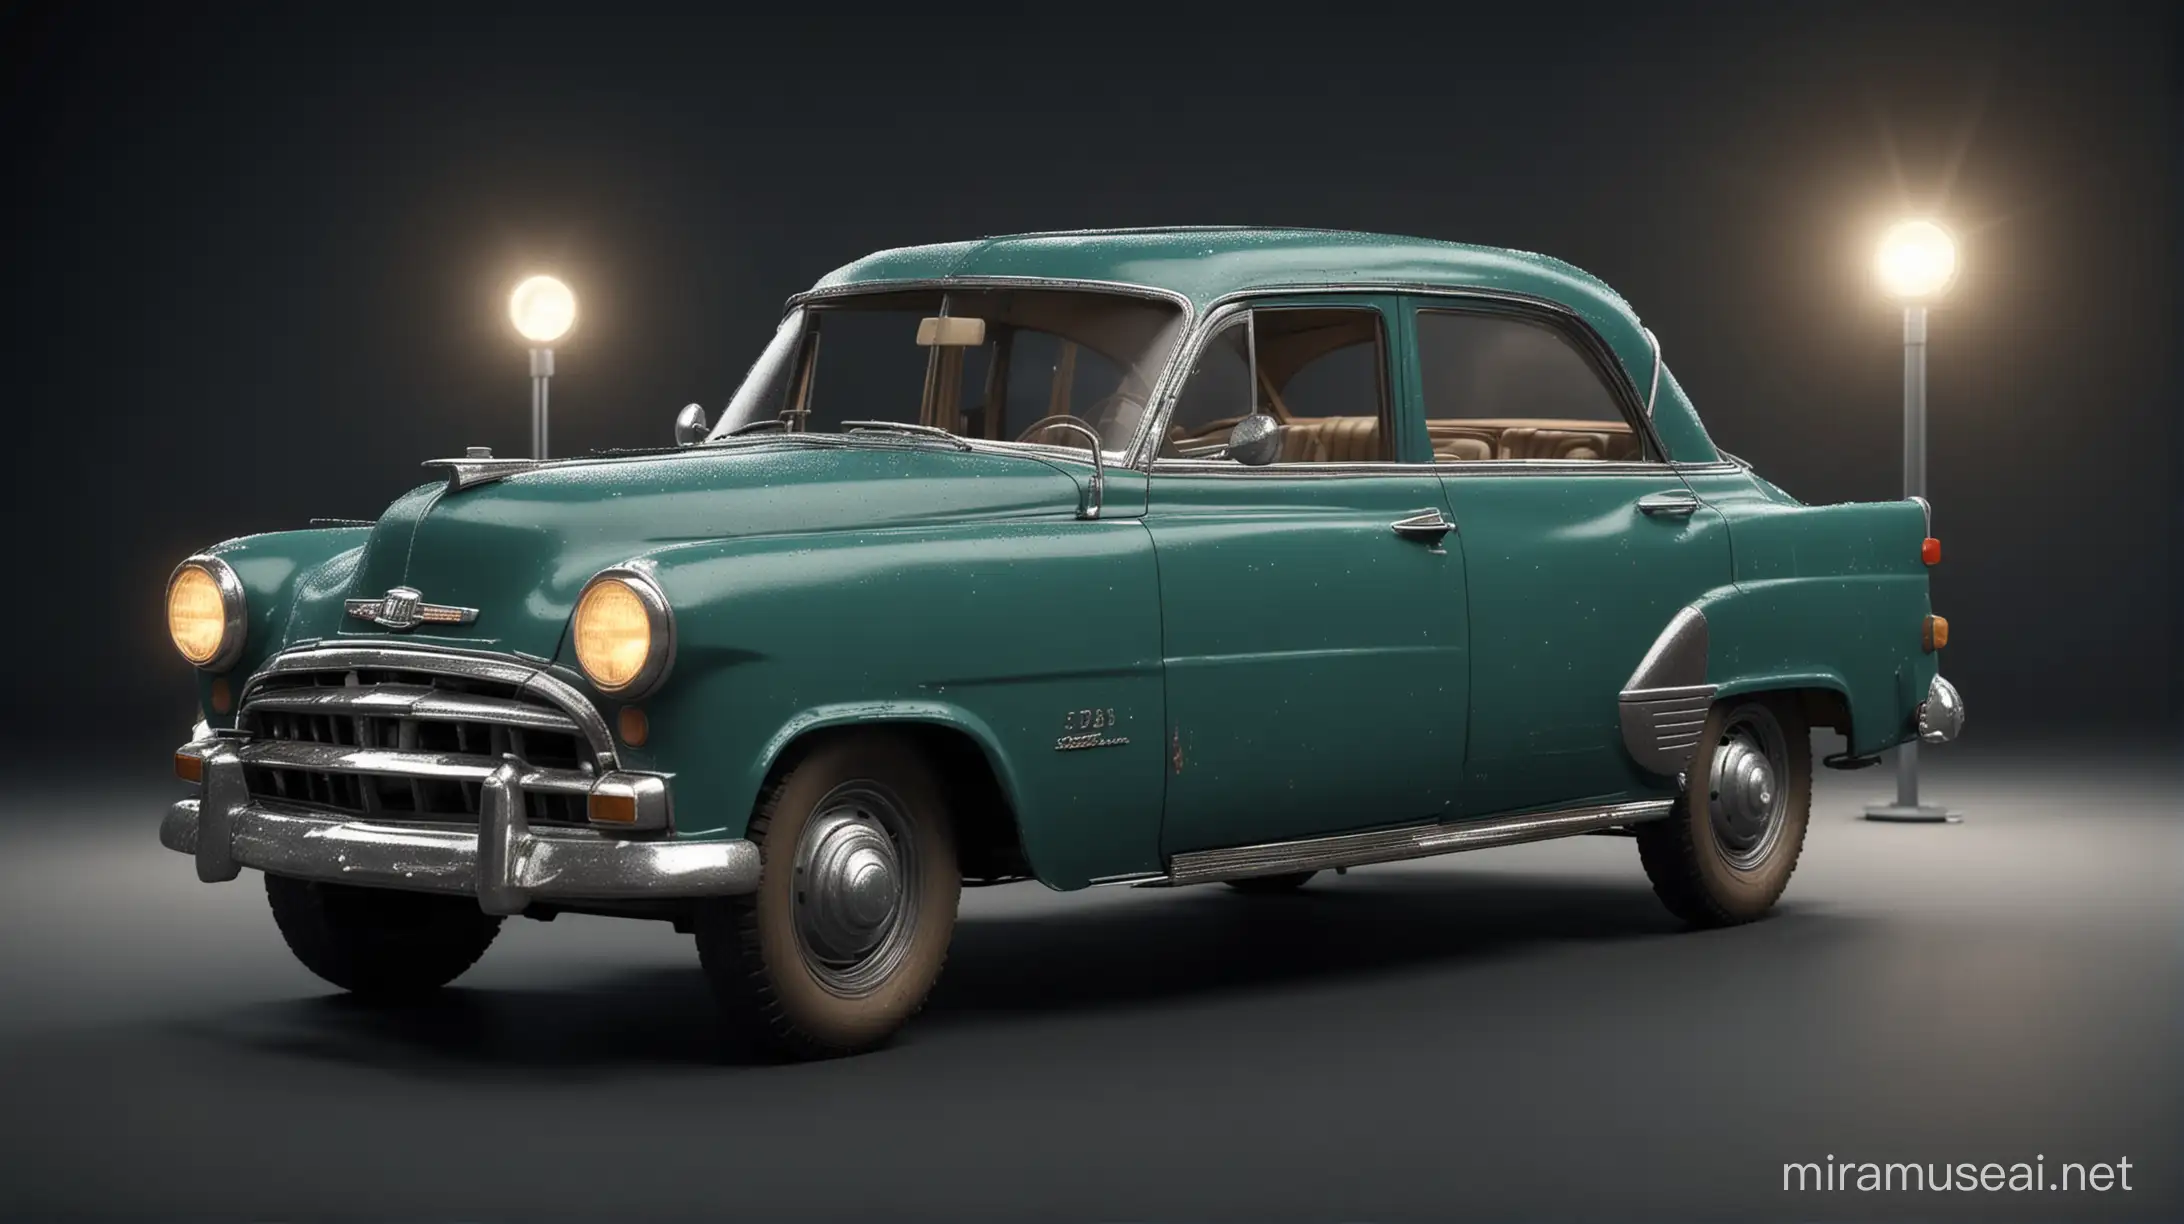 3D render of an old car toy, wide angle view, night shot with light, ultrarealistic